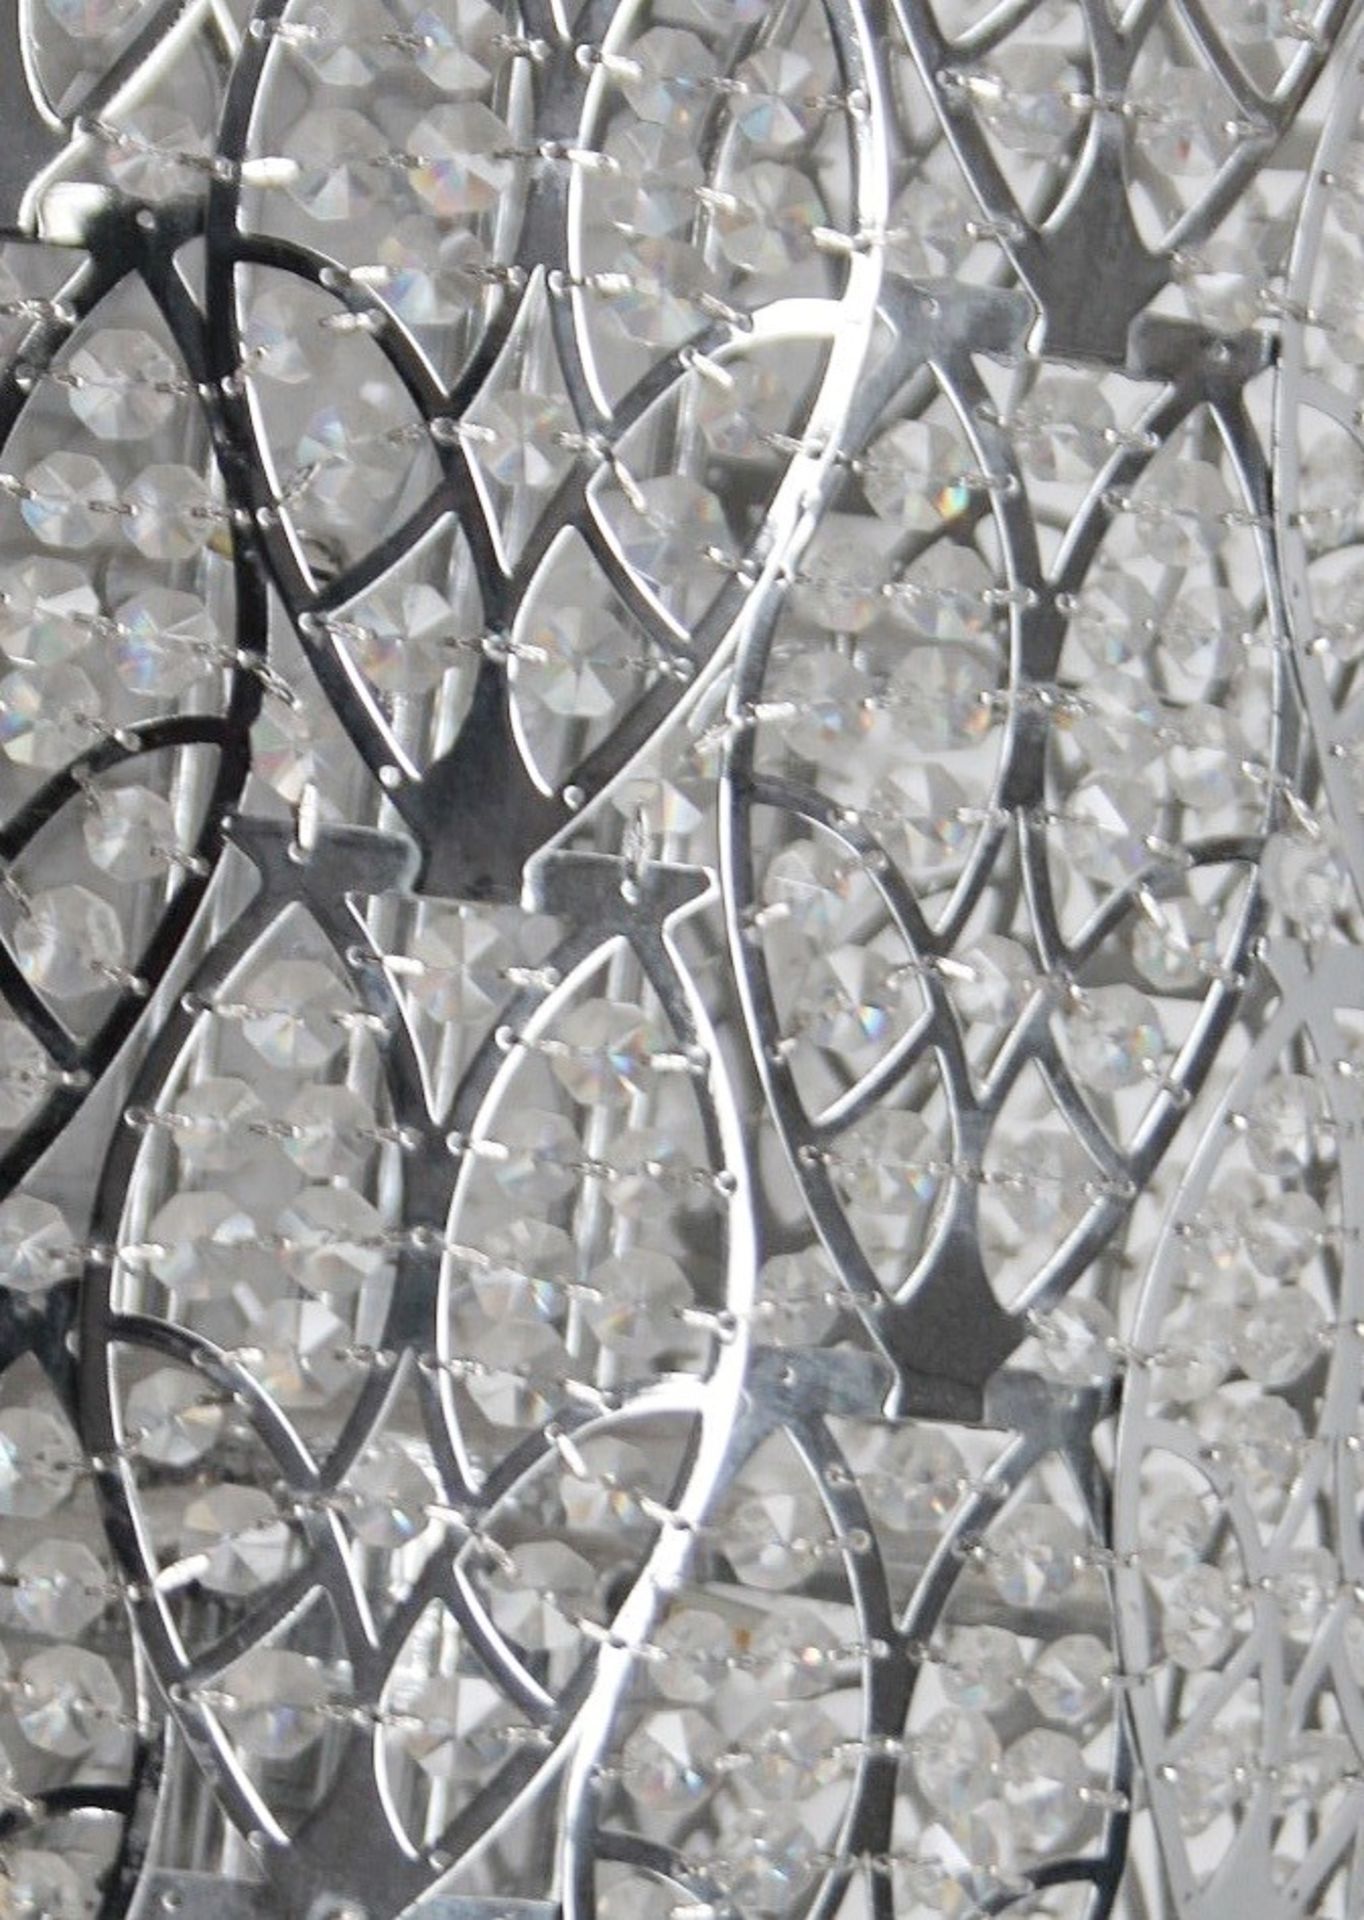 1 x High-end Italian LED Light Fitting Encrusted In Premium ASFOUR Crystal Elements - Approximate - Image 4 of 8